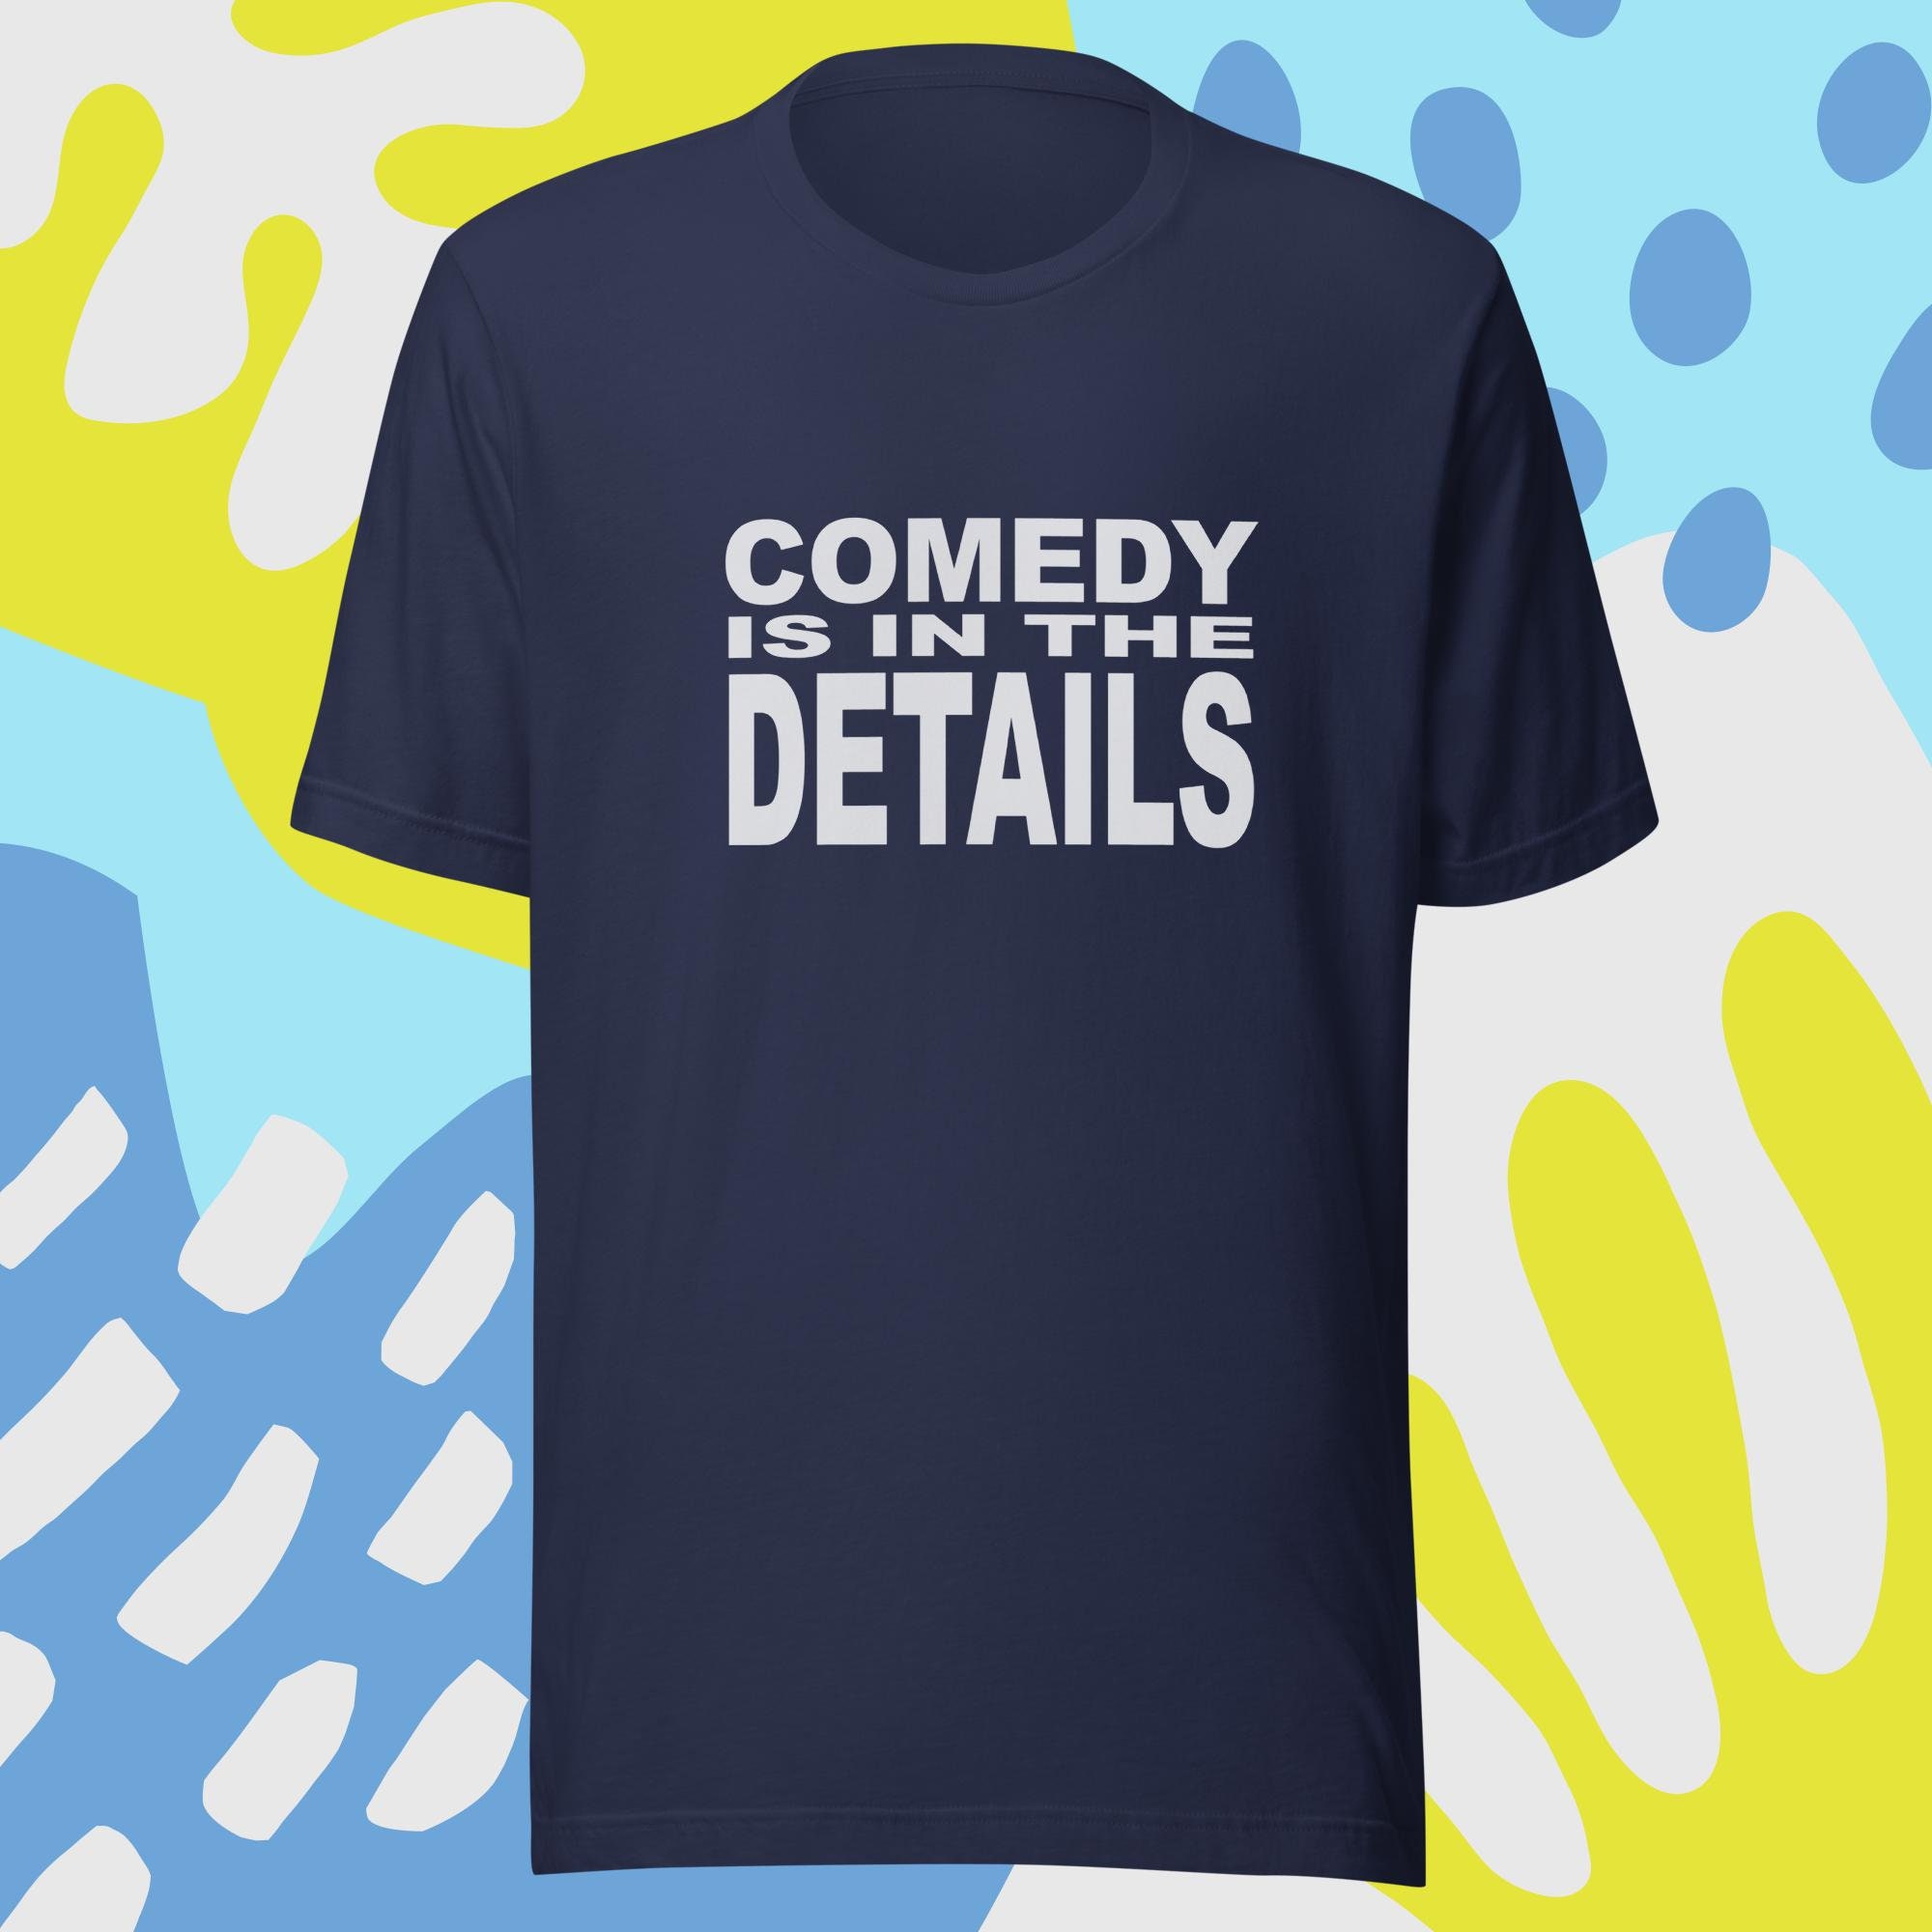 The Worry Free Comedy Shop  Featuring custom t-shirts, prints